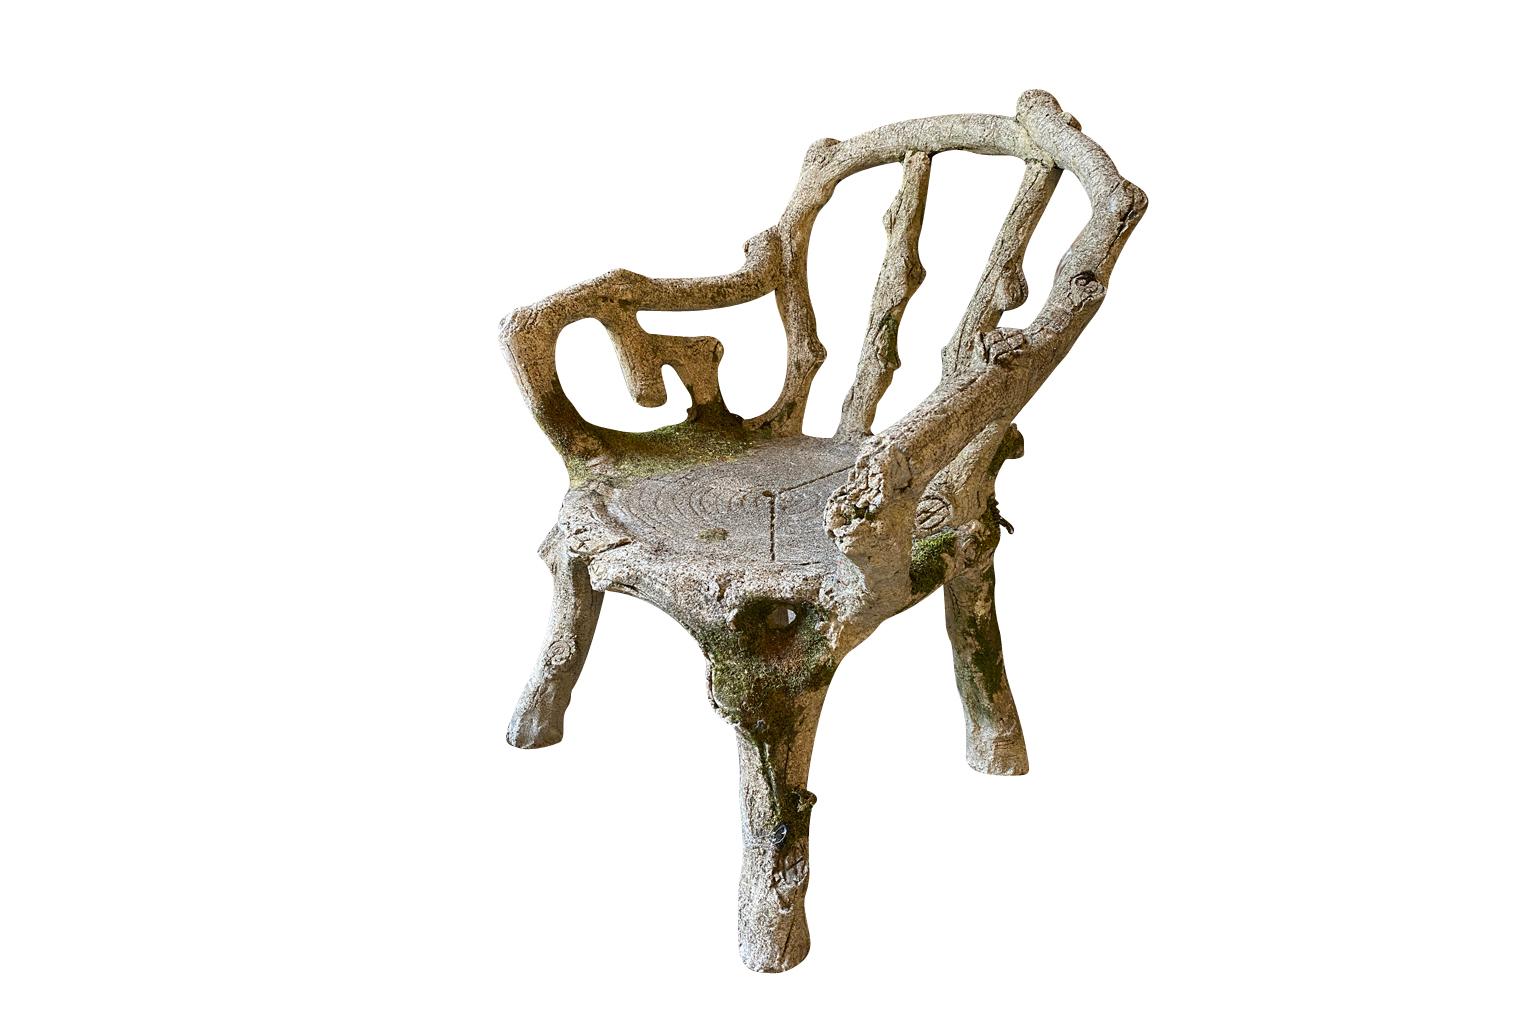 A very charming late 19th century Garden Chair from the Provence region of France. Beautifully crafted from concrete with wonderful detailing. The seat height is 17 1/8